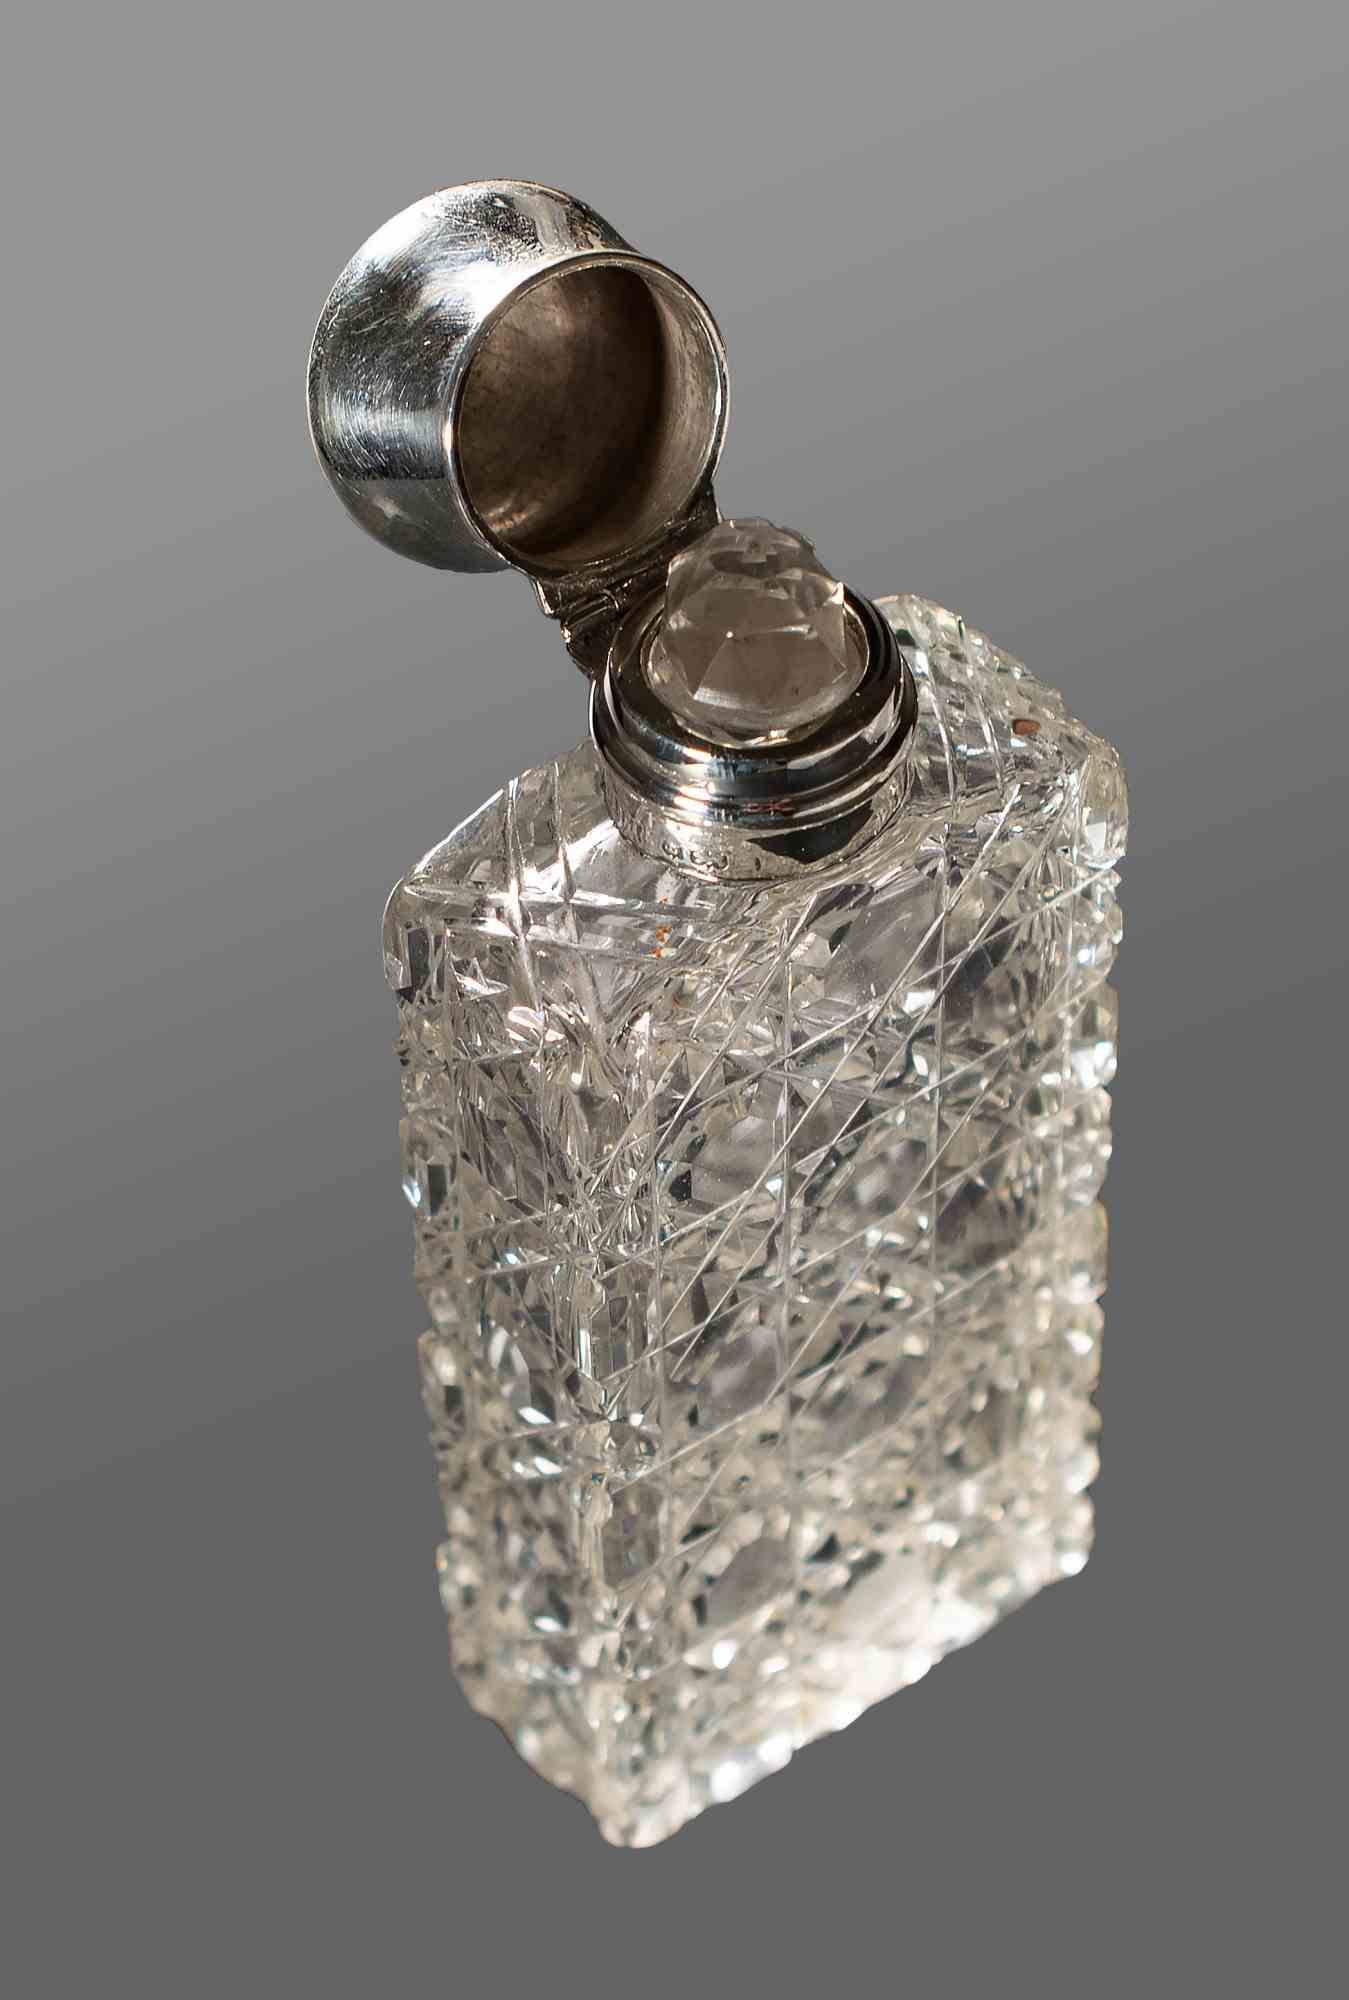 Pocket bottle for alcohol. Is a silver decorative object realized by French Artist of the Mid-20th Century.

Pocket bottle for alcohol. Made in France. Baccarat crystal with silver cap. 

Red enamel ferrule.